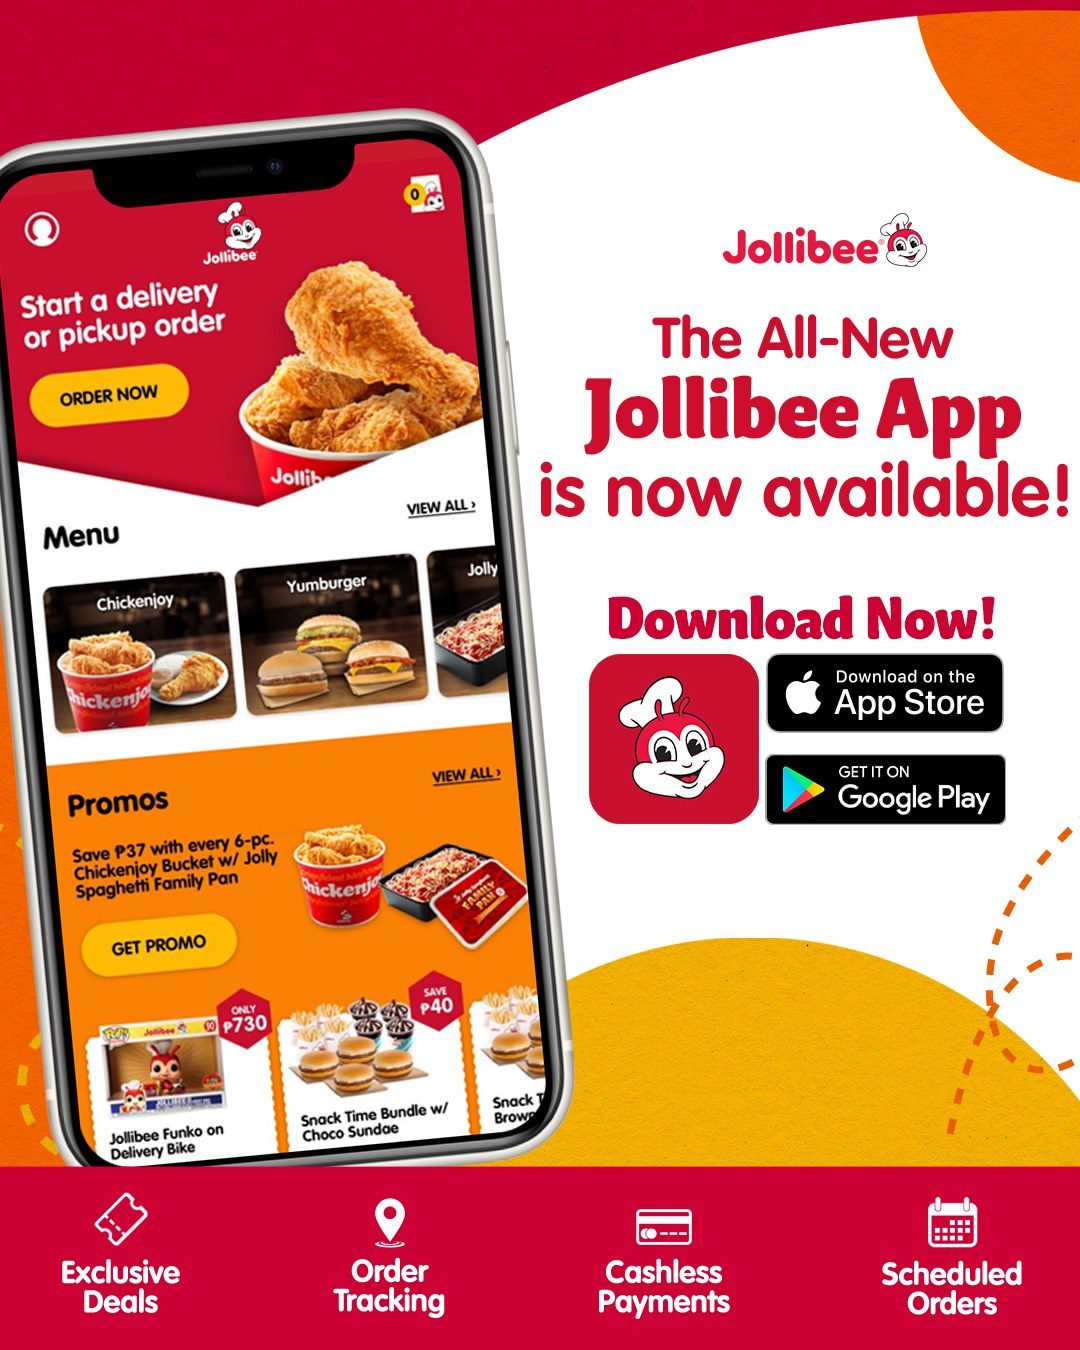 Jollibee launches new app for delivery